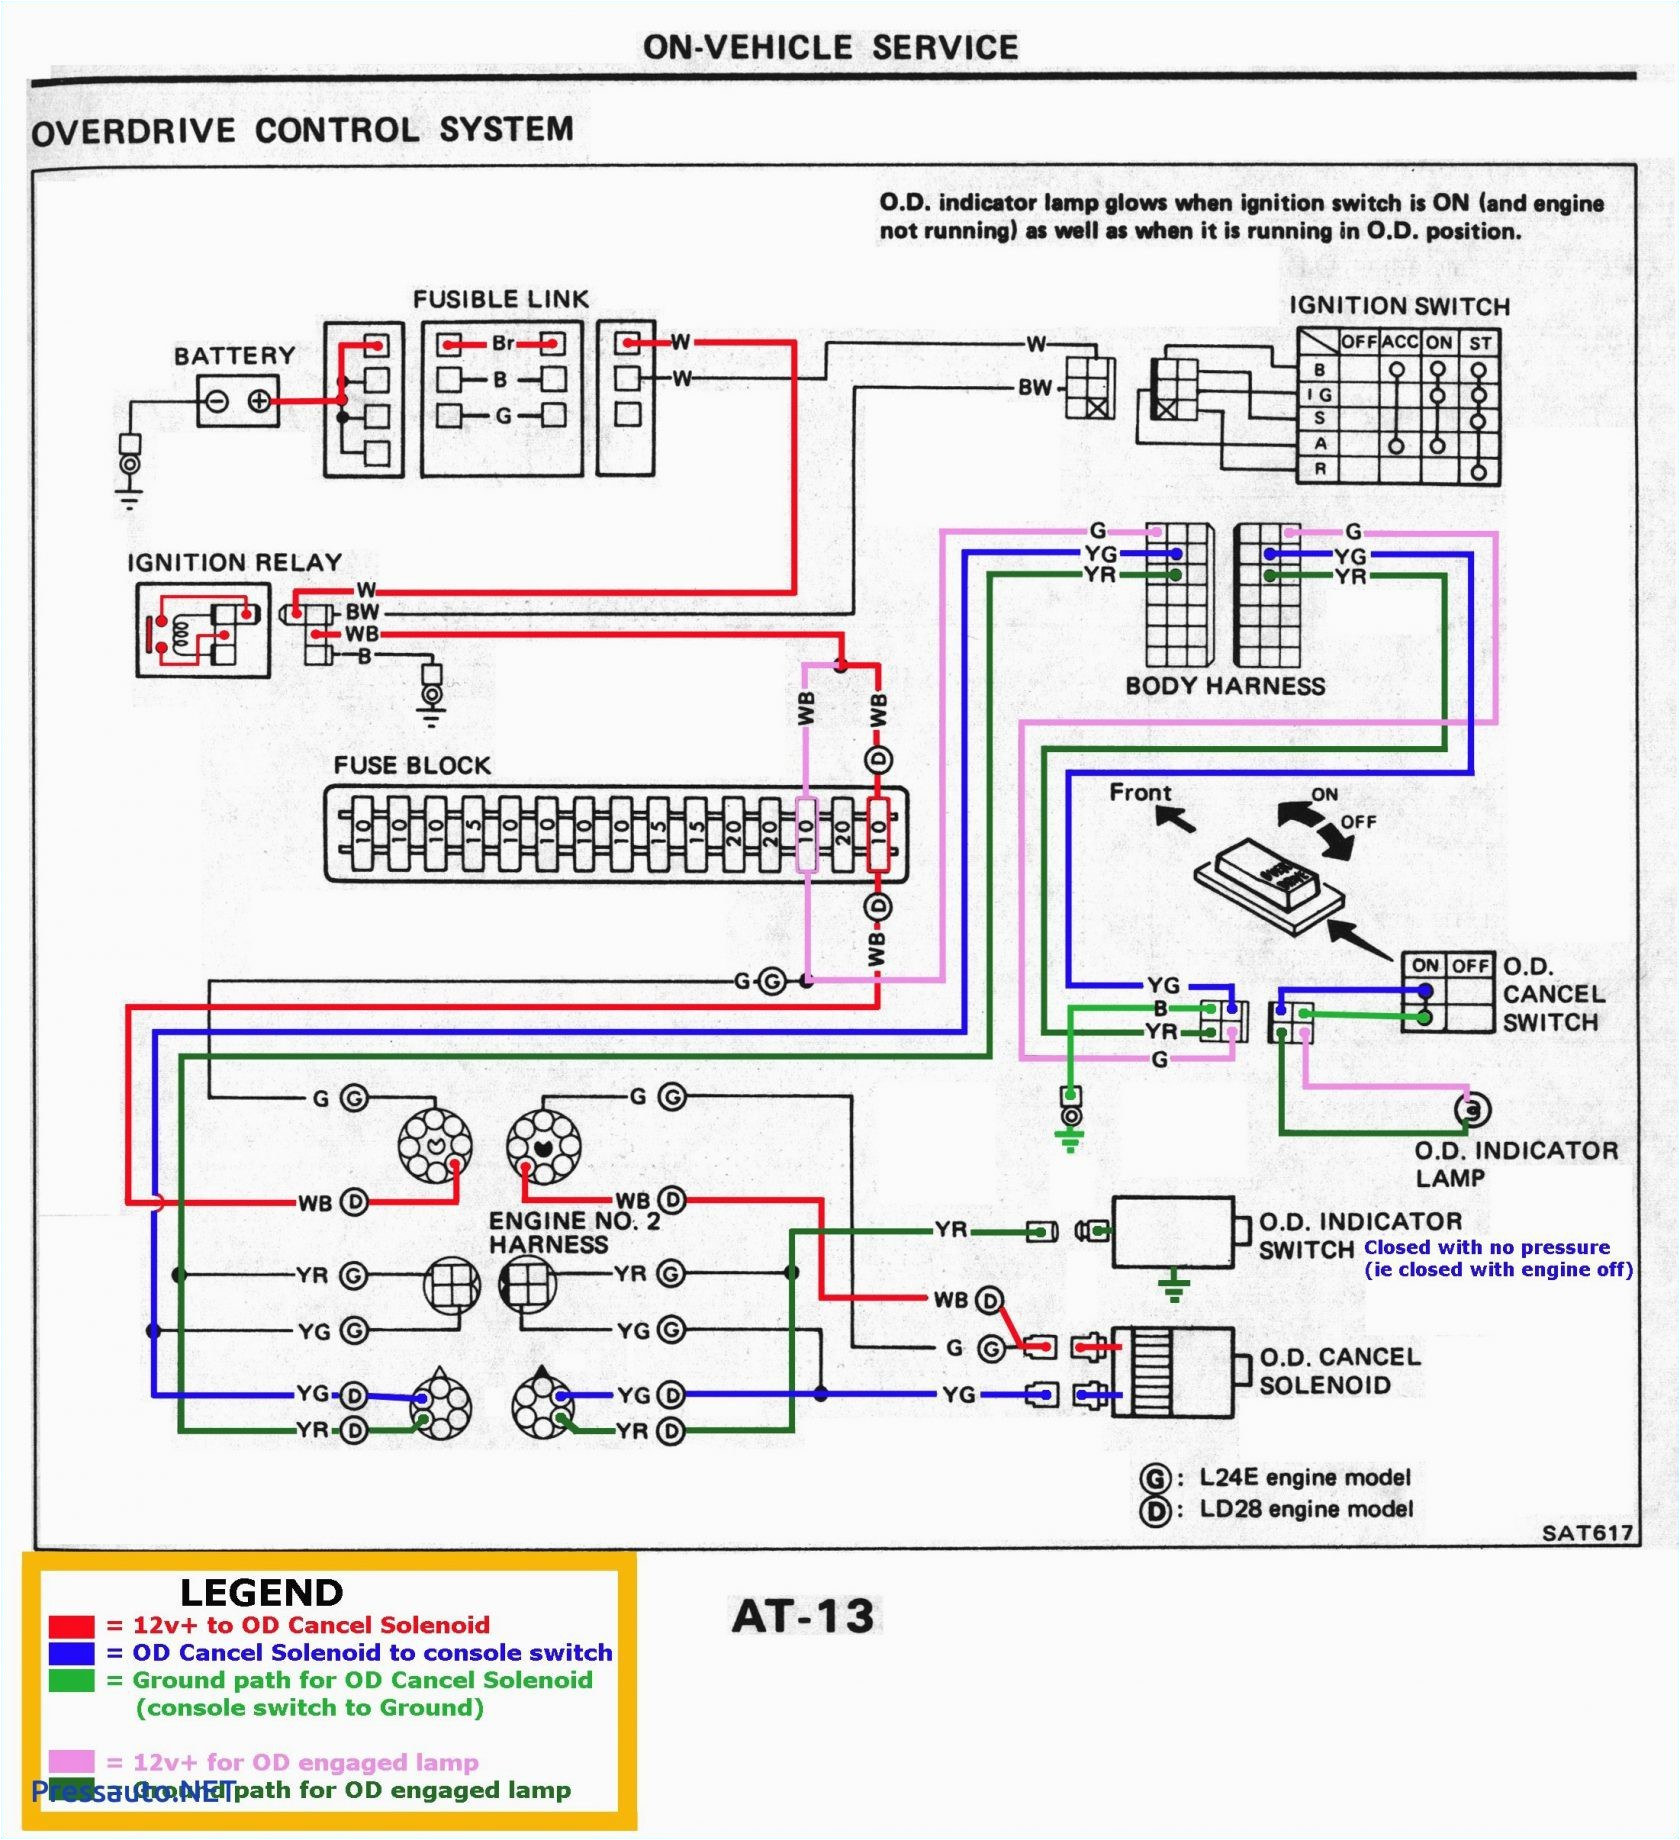 agm ignition switch wiring wiring diagram name ford ignition switch wiring diagram also 220v light switch wiring